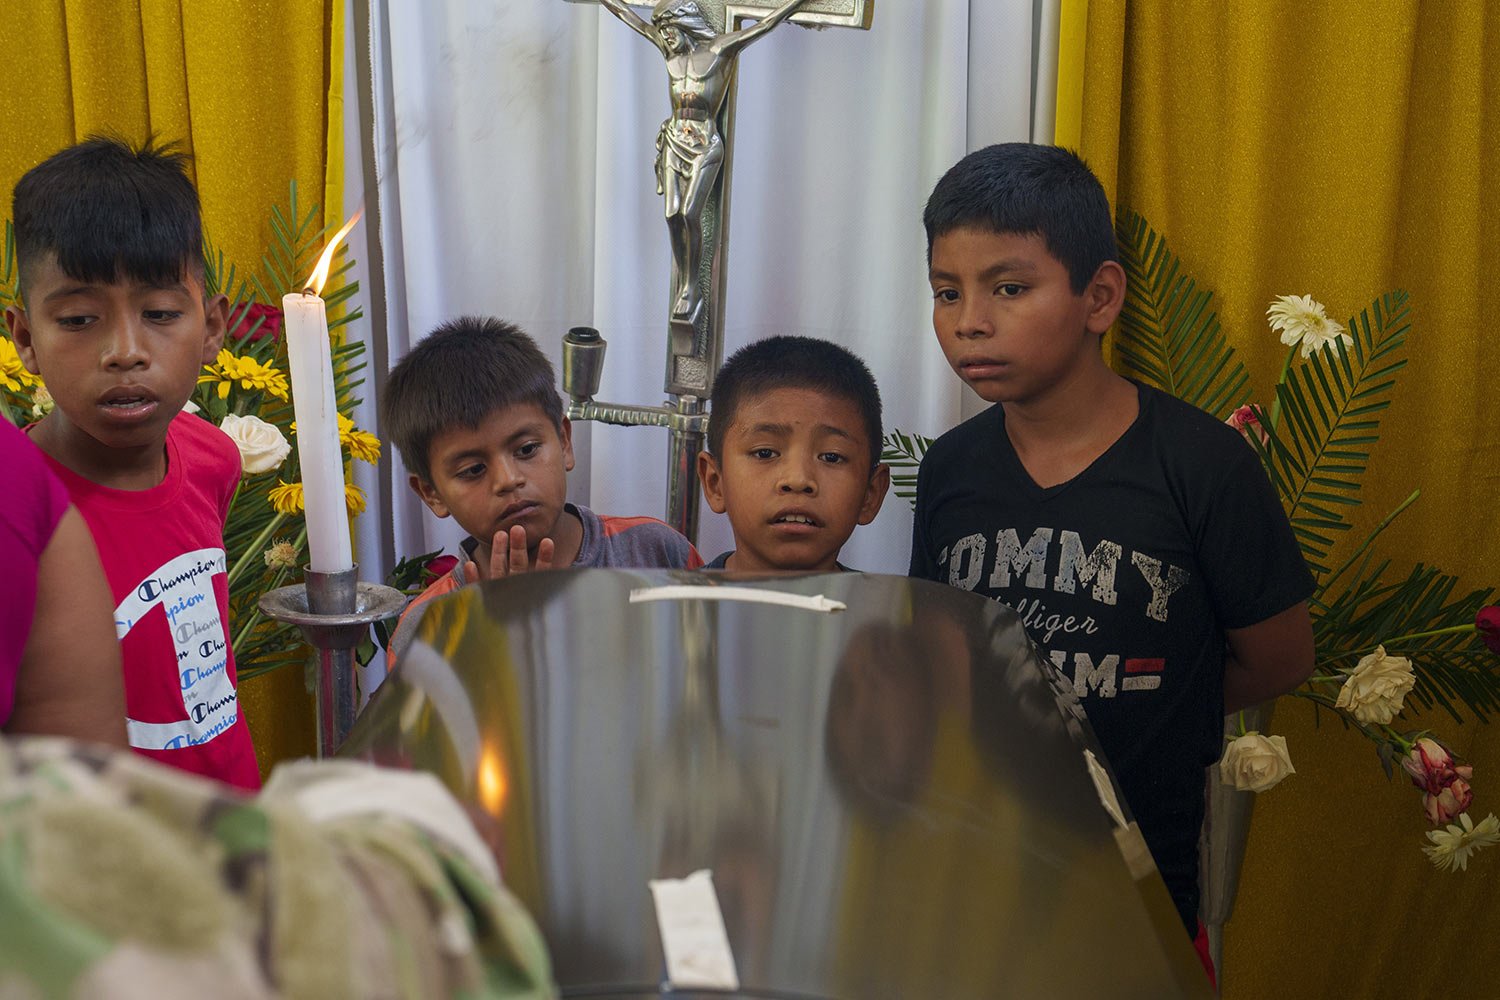  Youths attend the wake of Guatemalan migrant Francisco Rojche at his home in Chicacao, Guatemala, April 12, 2023. Rojche and his uncle Miguel died in a fire while they were held at a Mexican immigration detention center on the Mexico-US border in Ci